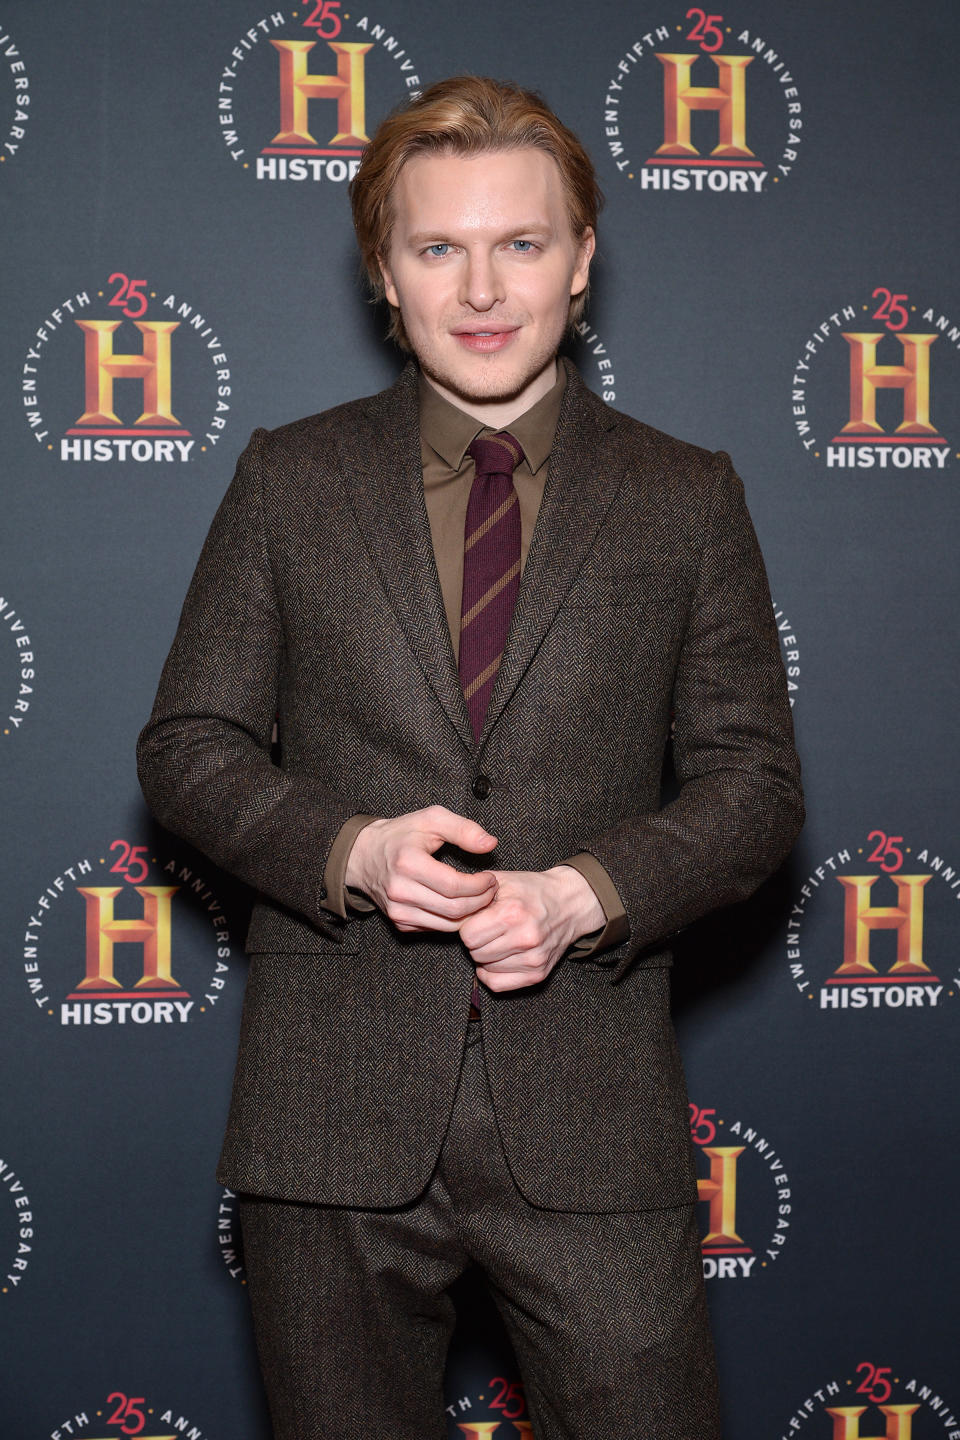 Journalist Ronan Farrow attends the �HISTORYTalks: Leadership & Legacy� event at Carnegie Hall in New York, NY, February 29, 2020. (Photo by Anthony Behar/Sipa USA)